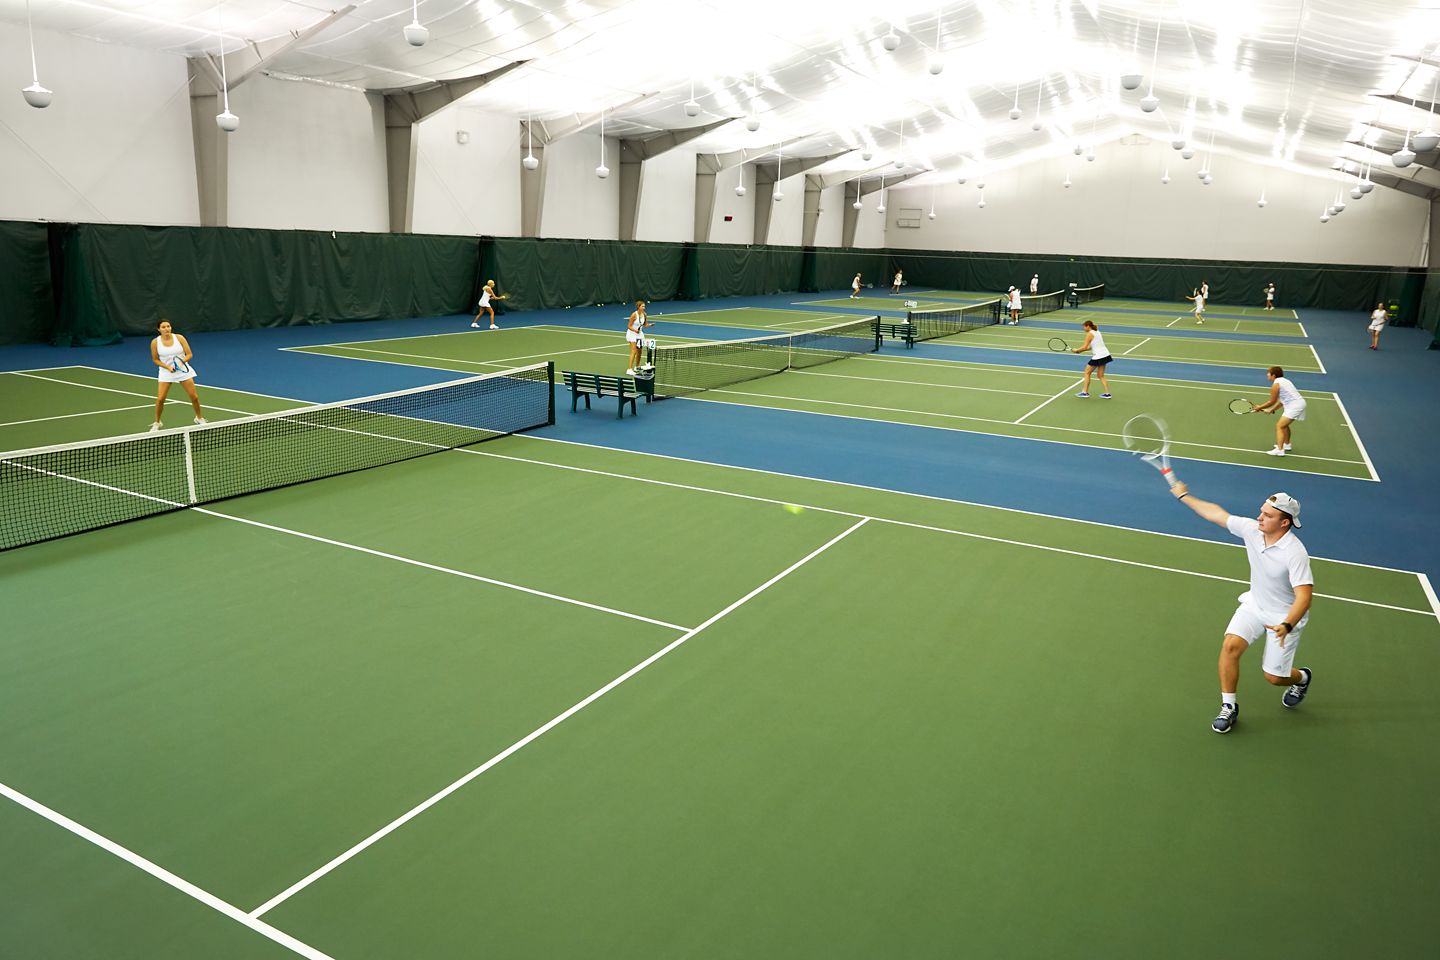 Tennis players playing on indoor courts